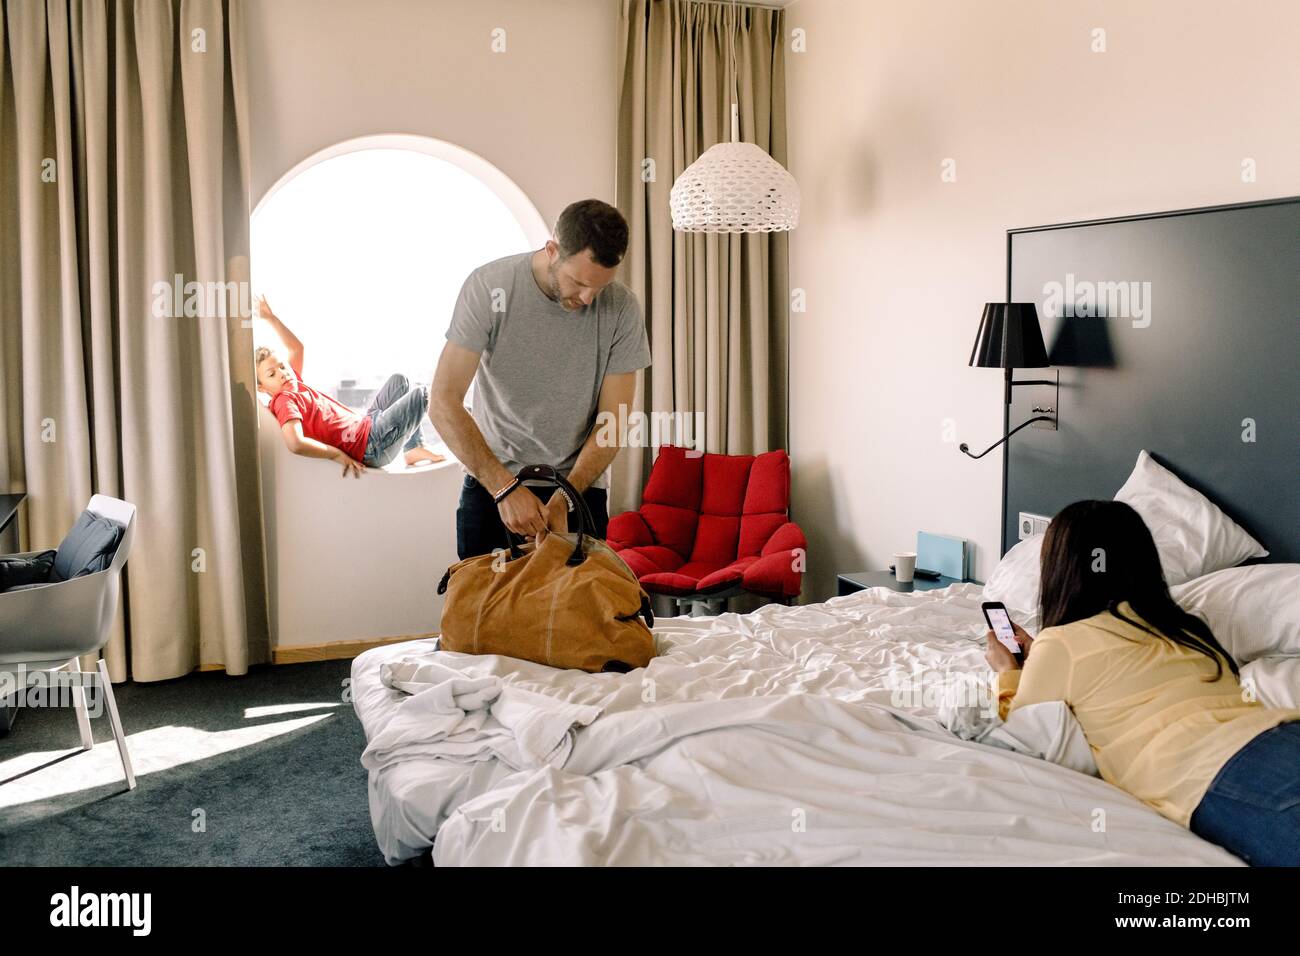 Man packing bag while woman using phone on bed in hotel Stock Photo